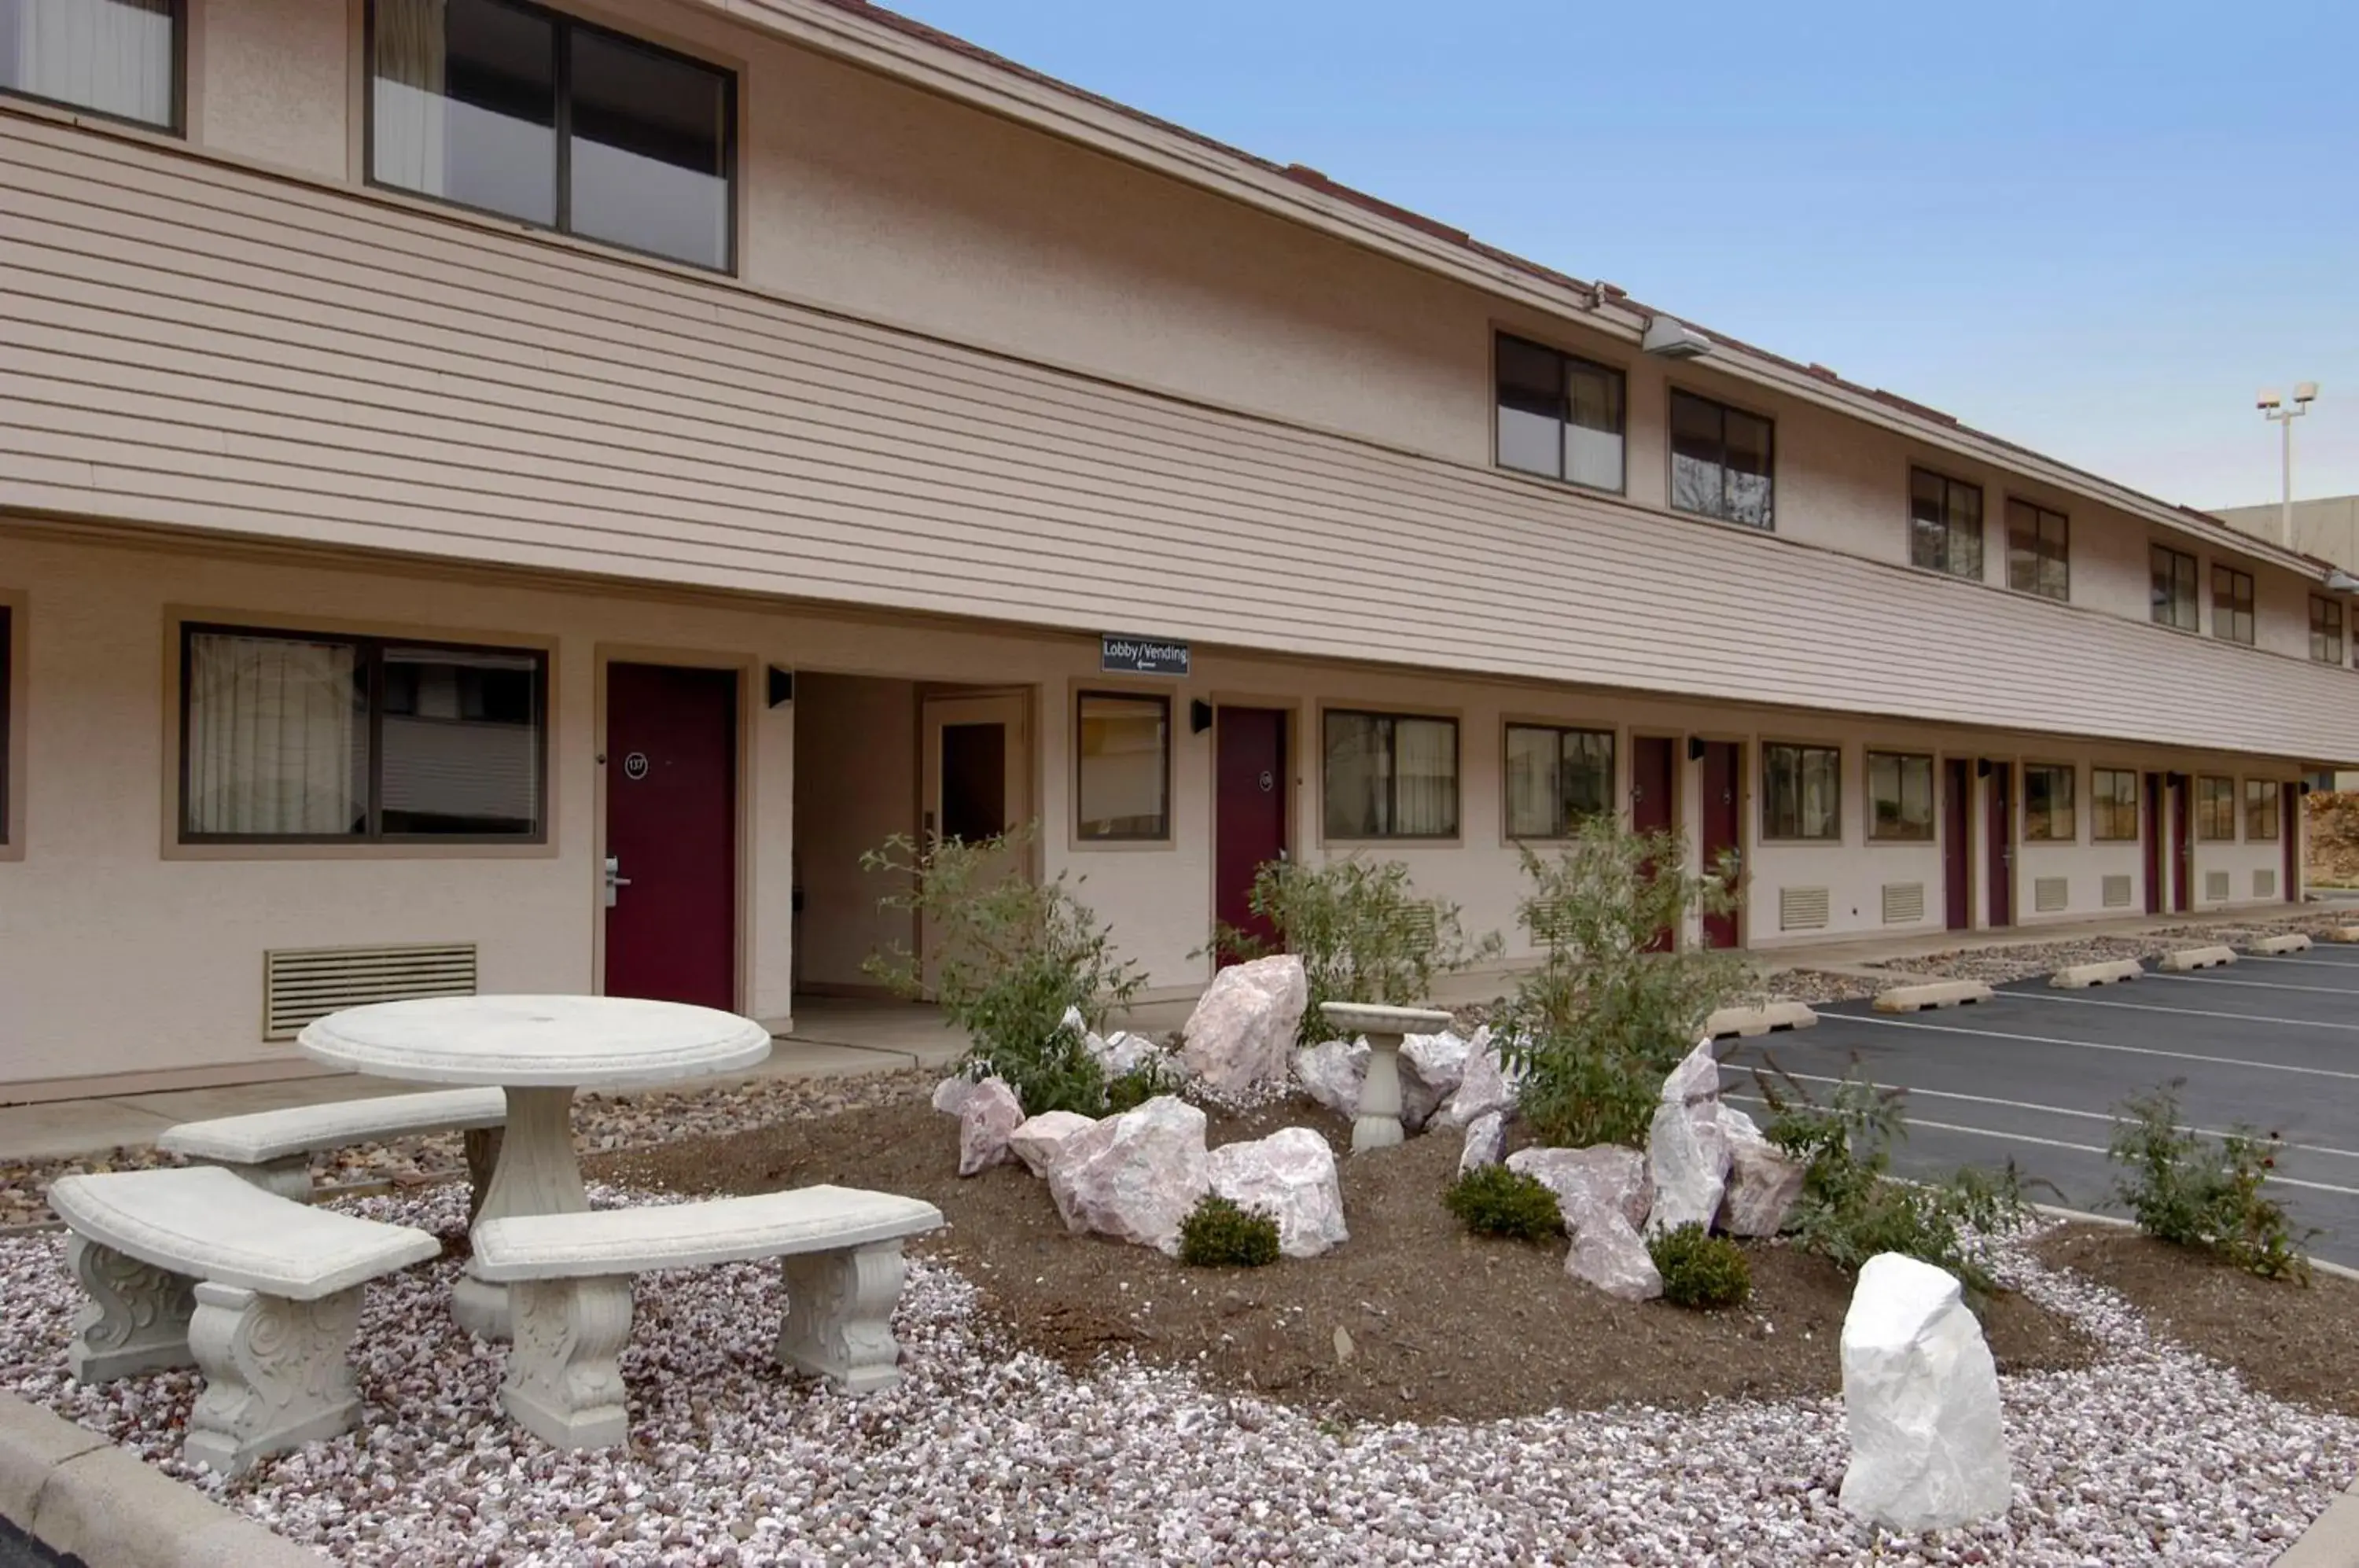 BBQ facilities, Property Building in Red Roof Inn Harrisburg - Hershey